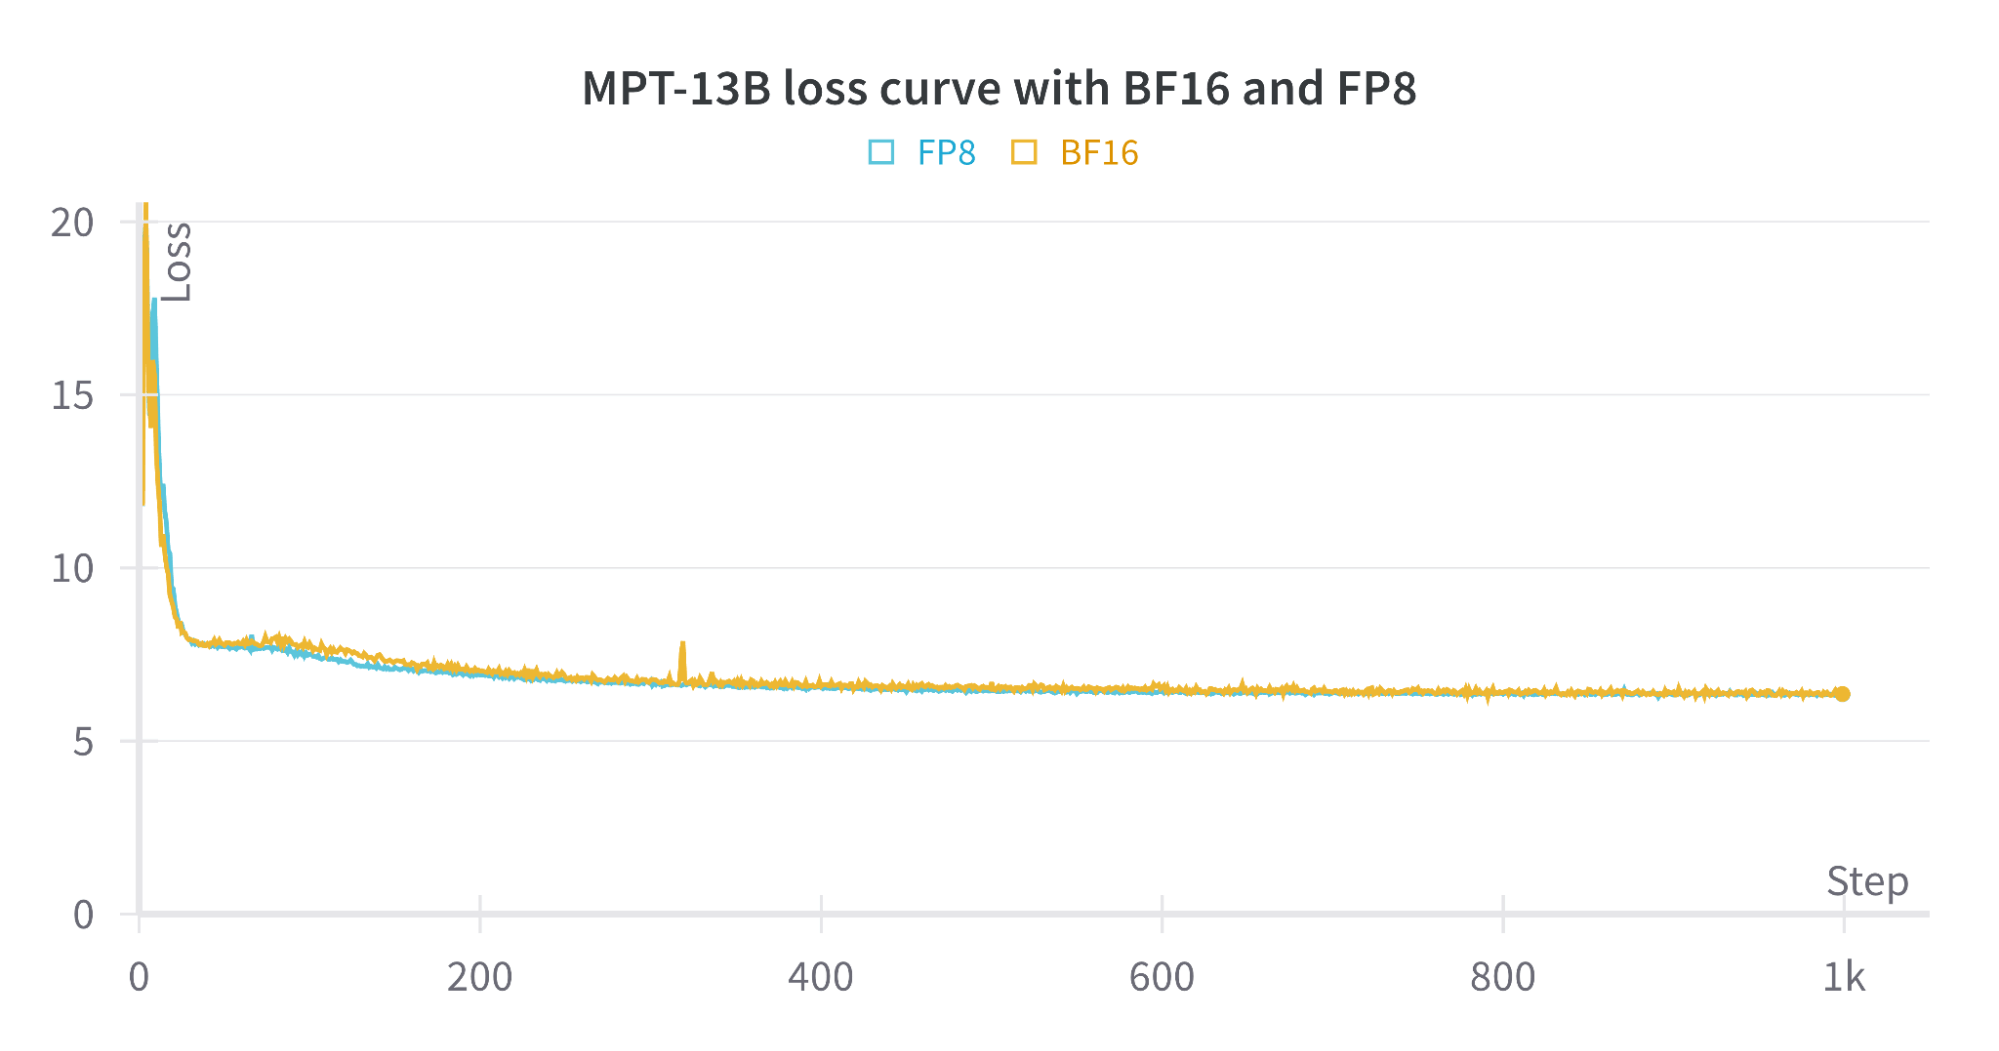 Loss curve comparison between BF16 and FP8 for MPT-13B when training for 1000 steps. 